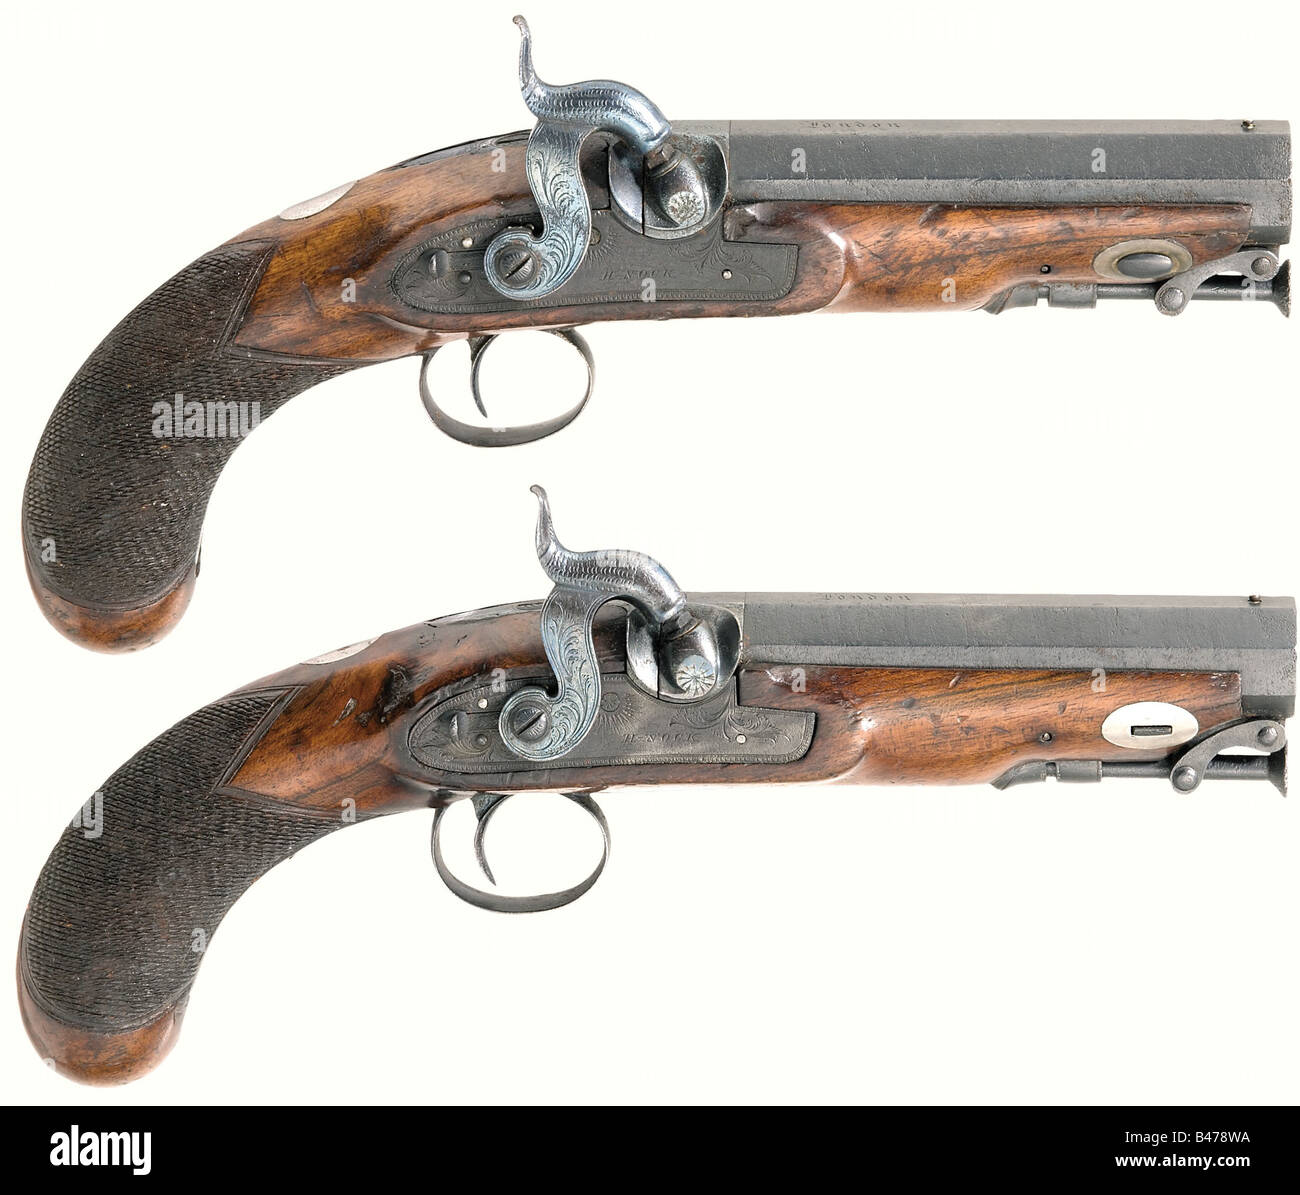 A pair of percussion pistols, Henry Nock, London, circa 1800. Octagonal barrels with smooth bore in 14 mm calibre with patent breechblocks and silver inlays over the chambers. 'London' is engraved on top of the barrels. The sides of each piece are stamped with an Irish registration number above the tower proof mark. Floral engraved converted percussion locks with slide safeties, signed, 'H. Nock.' Walnut full stocks with checkered grips. Engraved trigger guards and captive iron ramrods. Iron parts have light pitting and have been mostly reblued. Length of each , Stock Photo